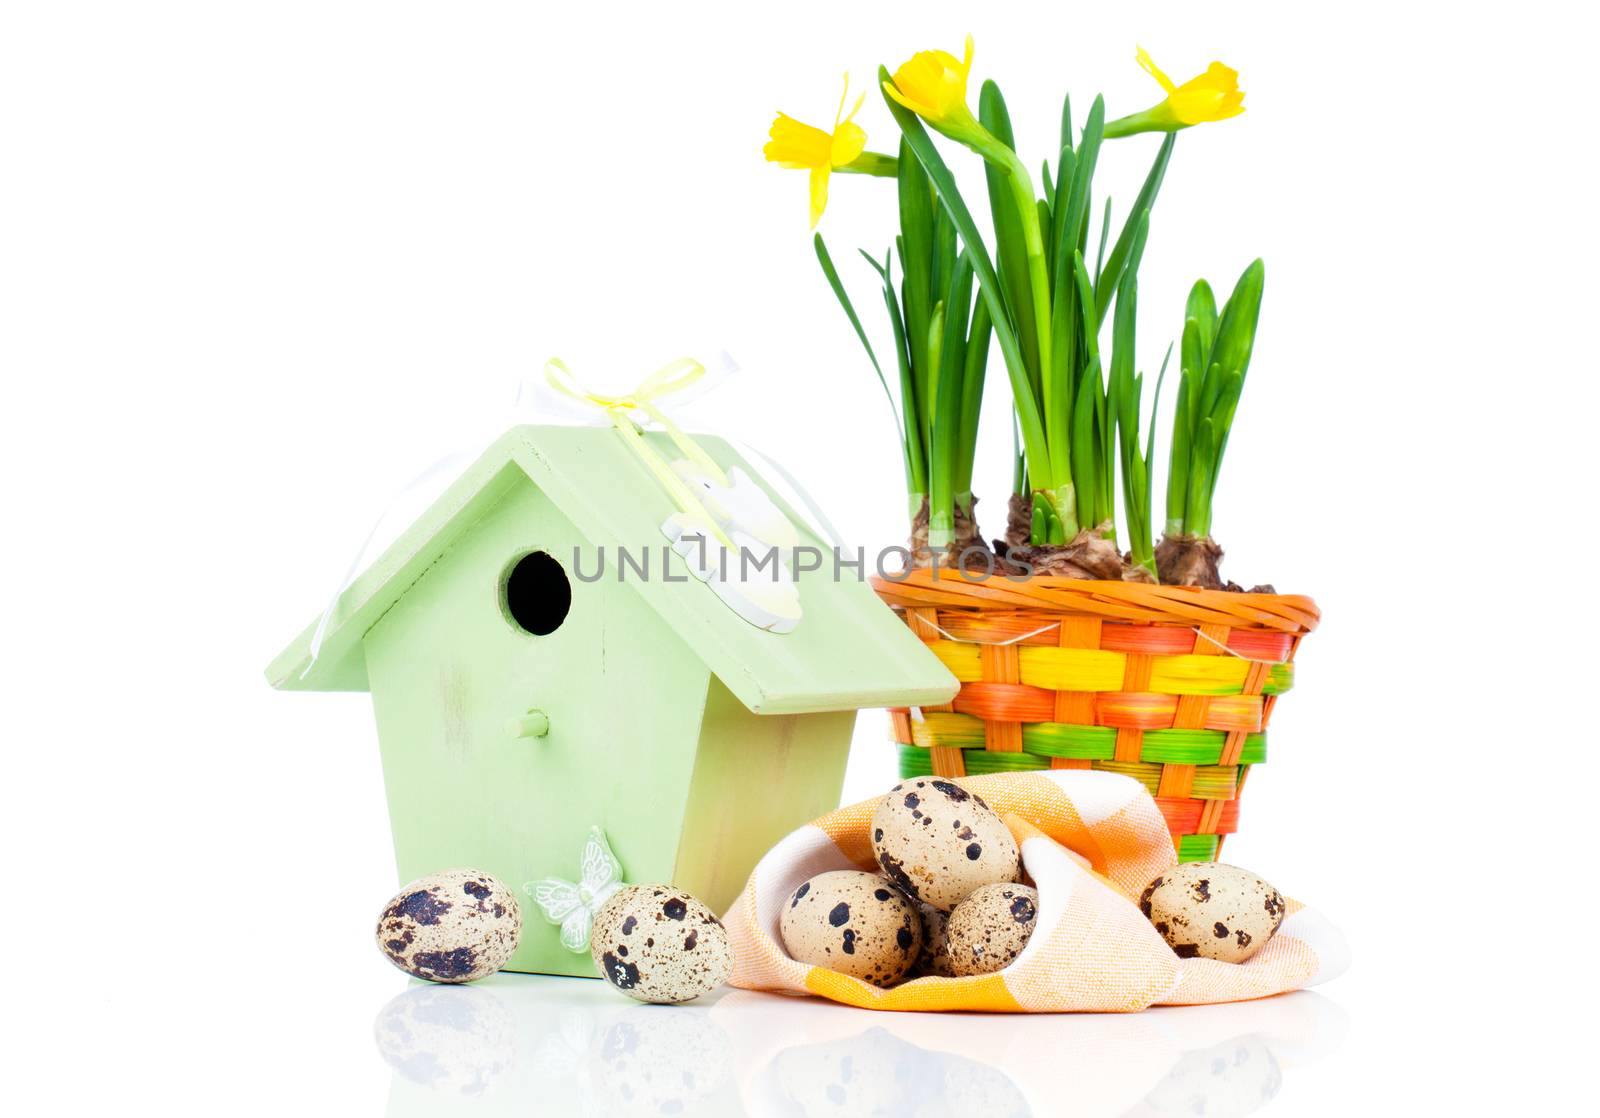 quail eggs with birdhouse, on a white background